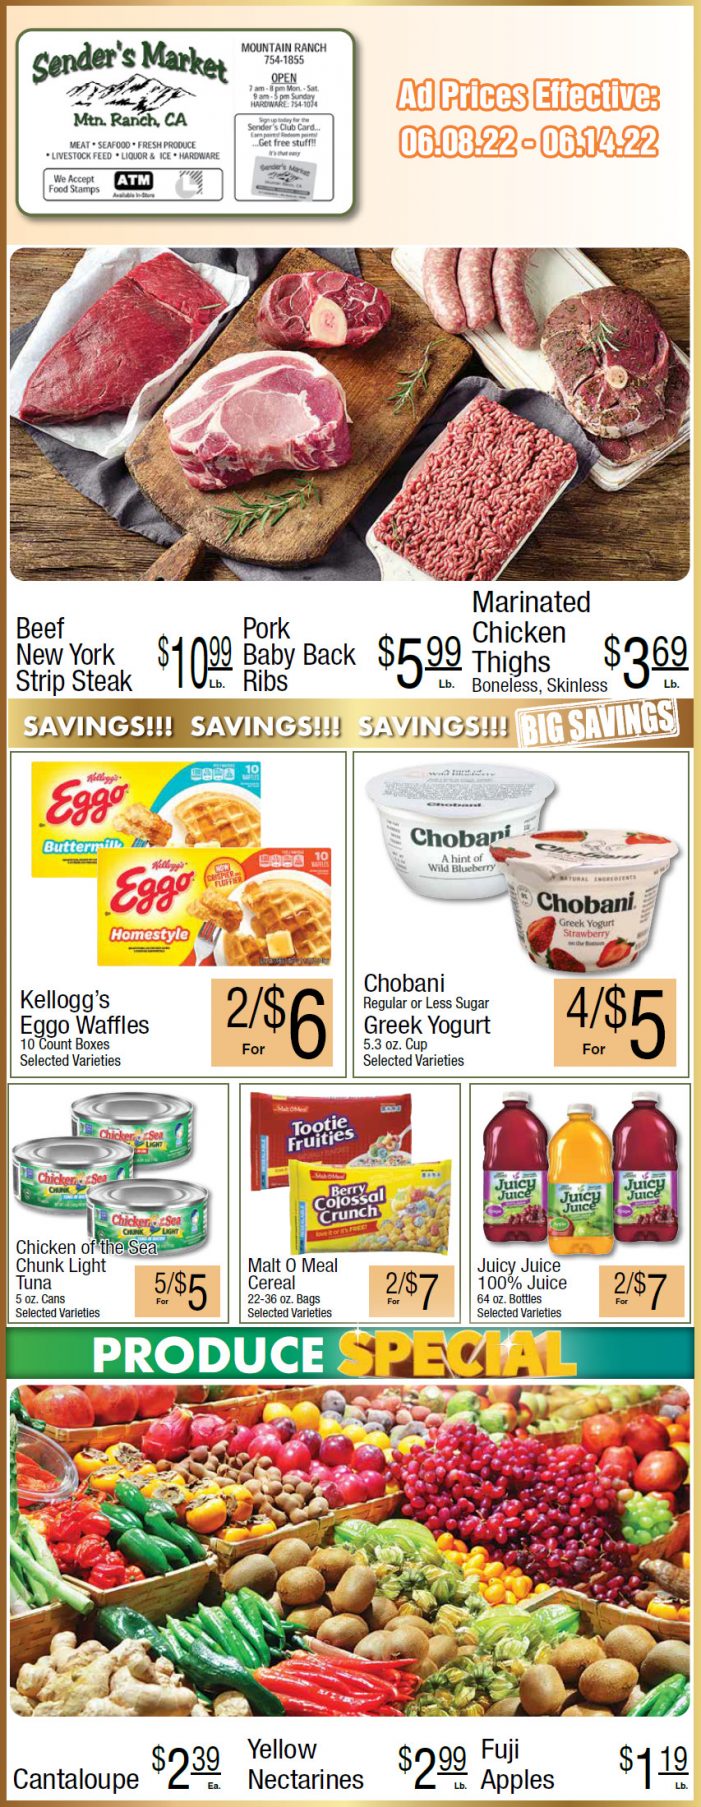 Sender’s Market Weekly Ad & Grocery Specials June 8 – 14! Shop Local & Save!